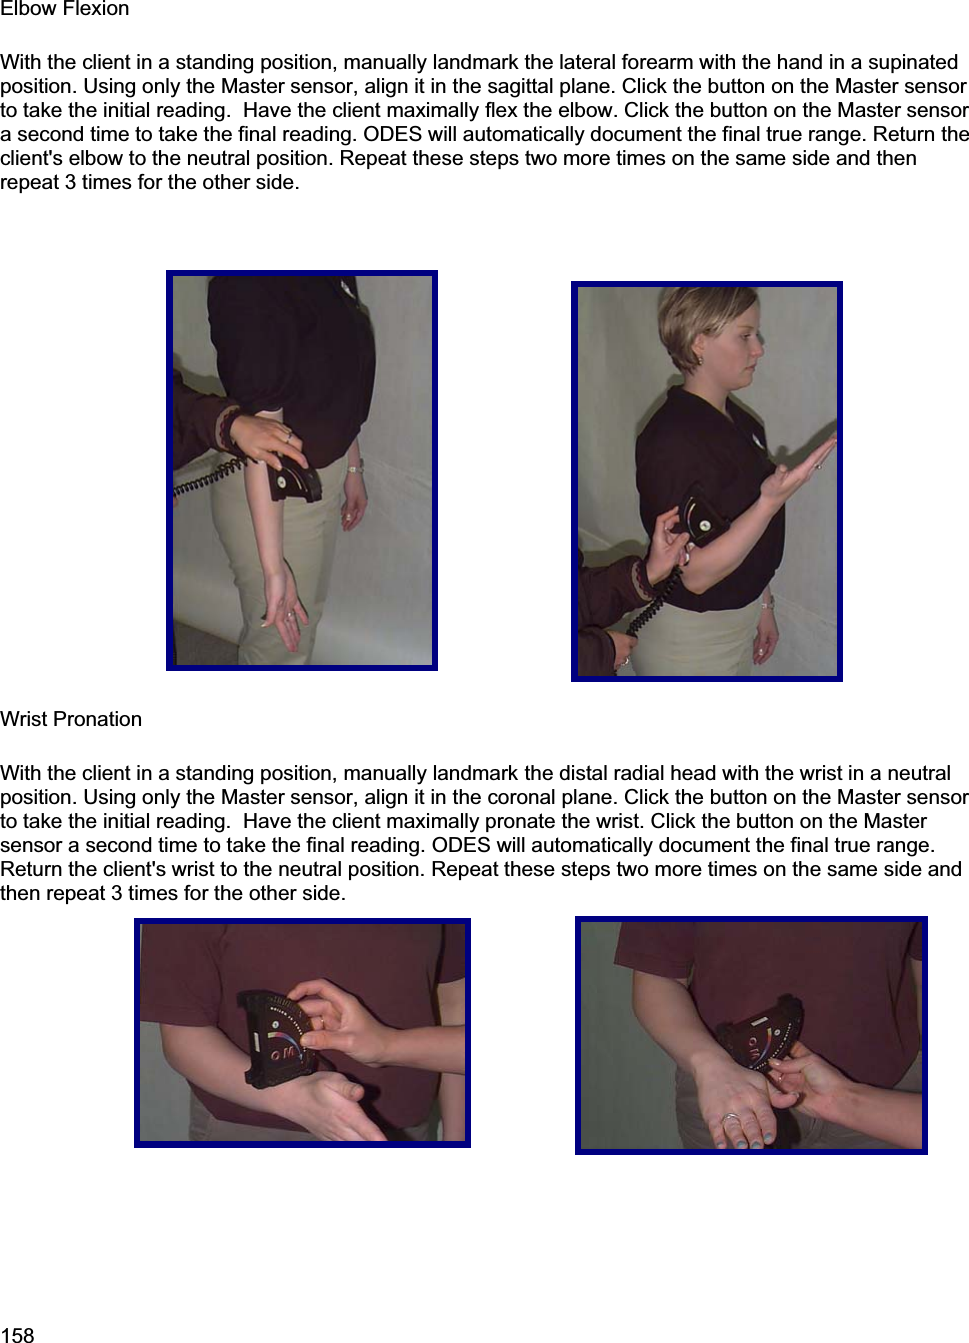 158Elbow Flexion With the client in a standing position, manually landmark the lateral forearm with the hand in a supinated position. Using only the Master sensor, align it in the sagittal plane. Click the button on the Master sensor to take the initial reading.  Have the client maximally flex the elbow. Click the button on the Master sensor a second time to take the final reading. ODES will automatically document the final true range. Return the client&apos;s elbow to the neutral position. Repeat these steps two more times on the same side and then repeat 3 times for the other side. Wrist Pronation With the client in a standing position, manually landmark the distal radial head with the wrist in a neutral position. Using only the Master sensor, align it in the coronal plane. Click the button on the Master sensor to take the initial reading.  Have the client maximally pronate the wrist. Click the button on the Master sensor a second time to take the final reading. ODES will automatically document the final true range. Return the client&apos;s wrist to the neutral position. Repeat these steps two more times on the same side and then repeat 3 times for the other side. 